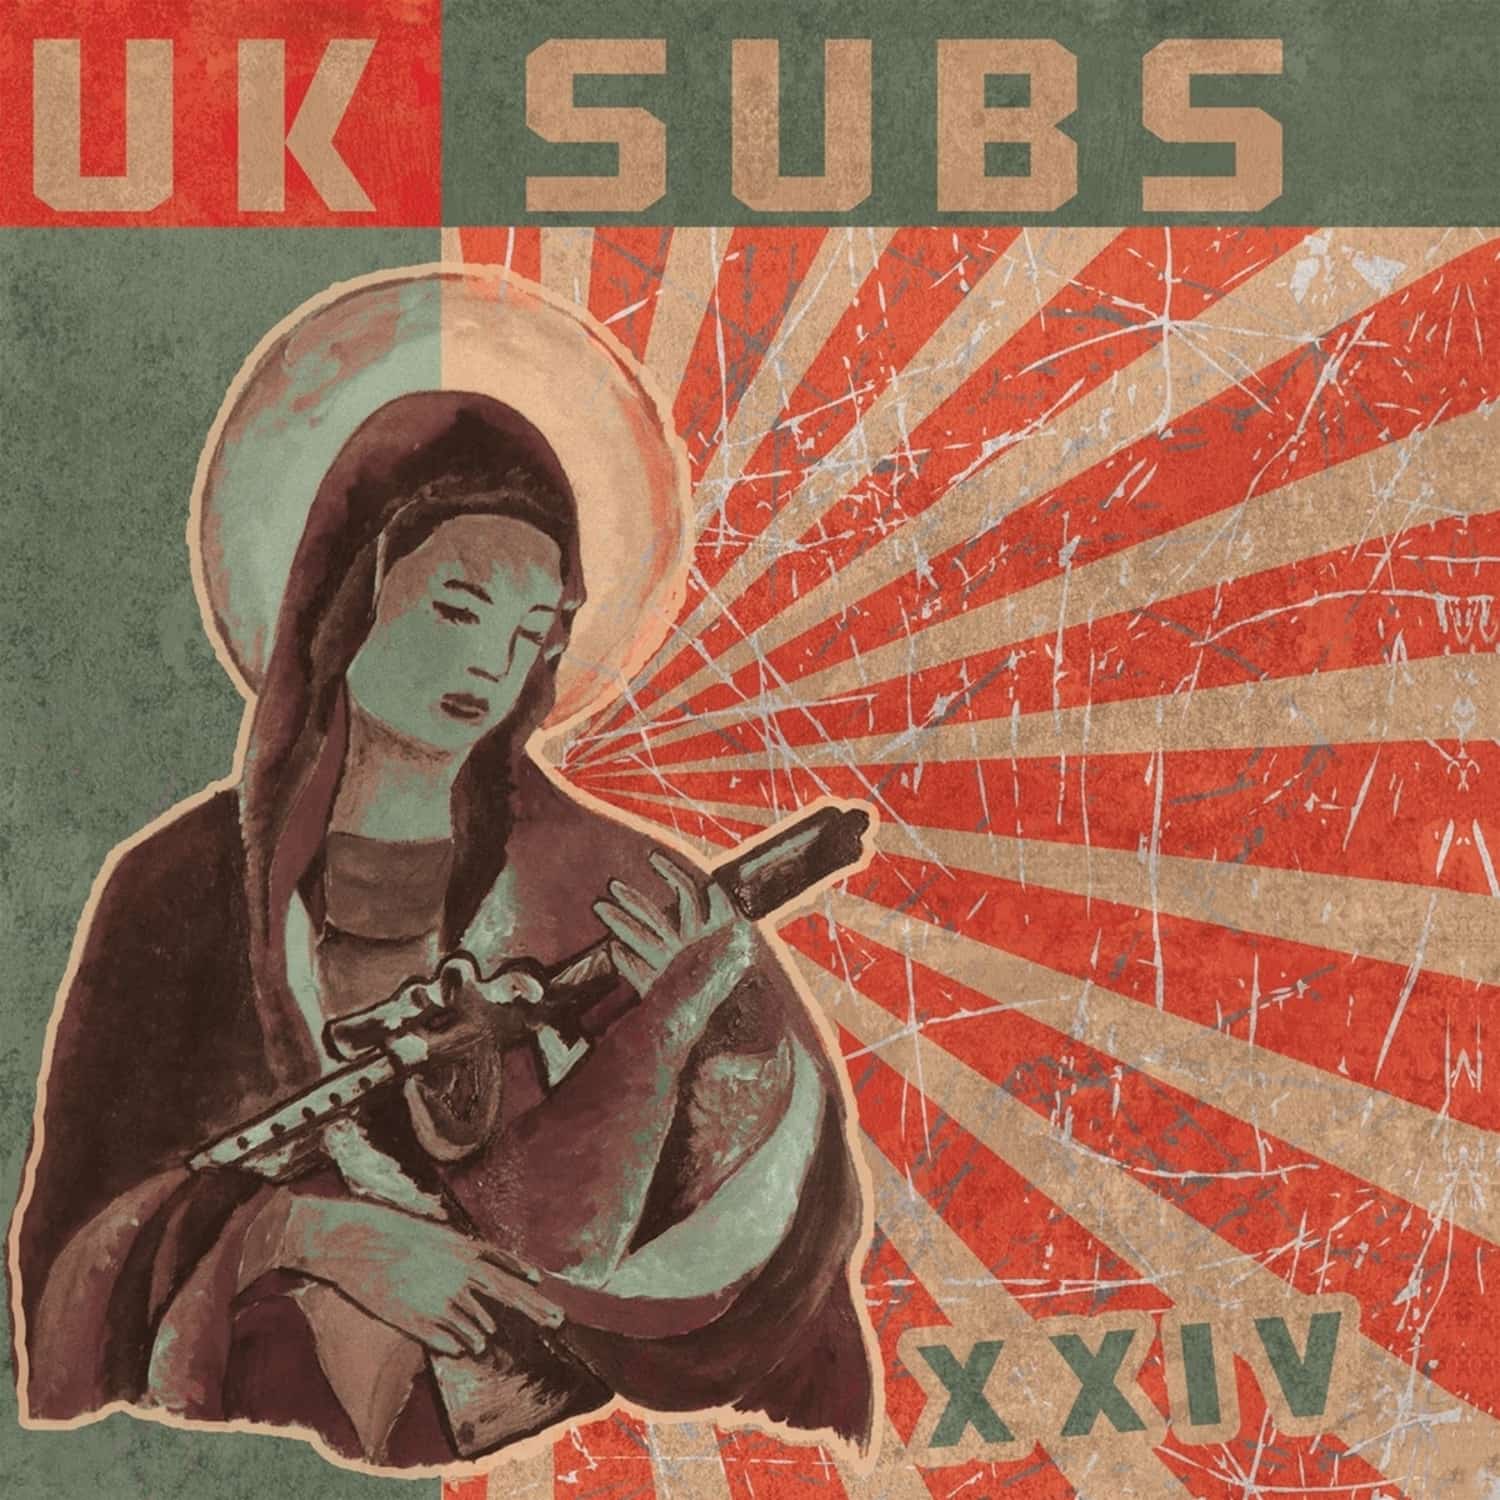 UK Subs - XXIV-DOUBLE 10INCH GREEN / CLEAR VINYL EDITION 